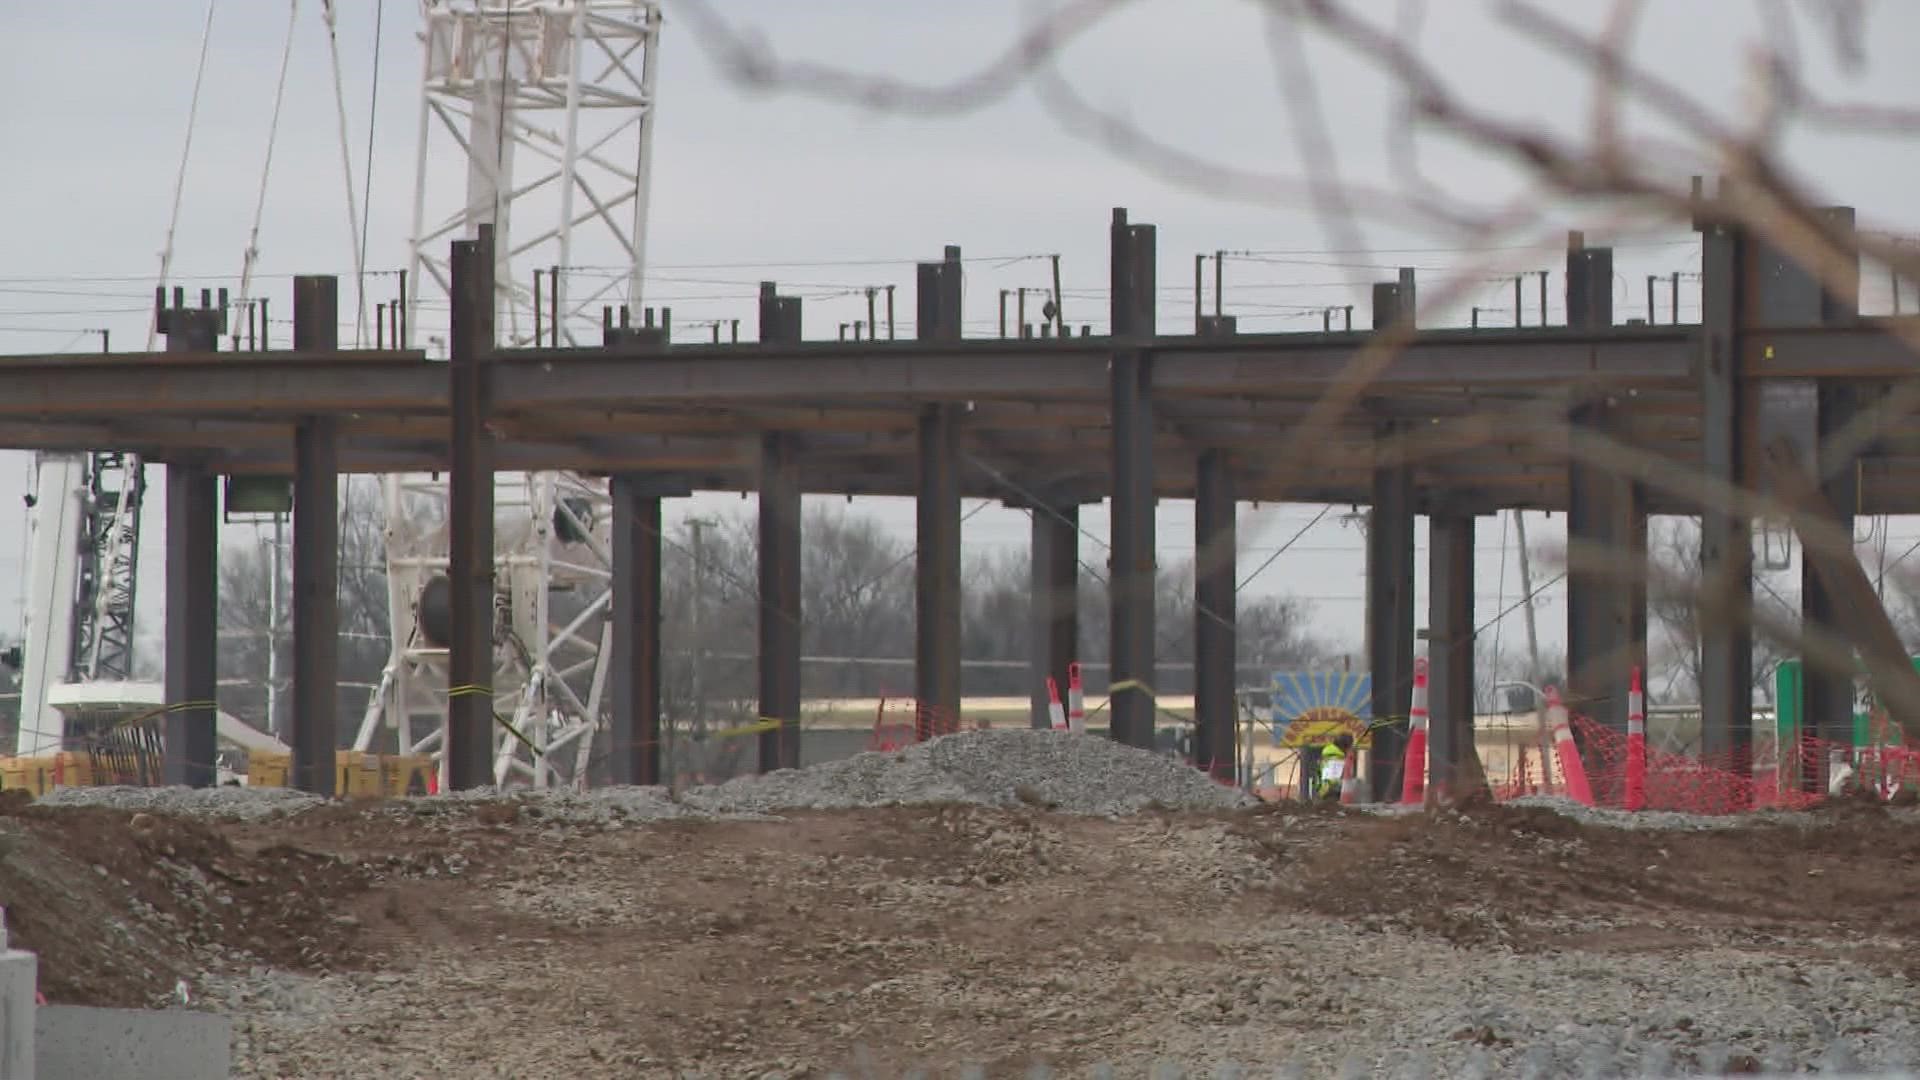 After more than a three month pause and an investigation, blasting has resumed at the future site of Louisville's VA Hospital near Brownsboro Road.